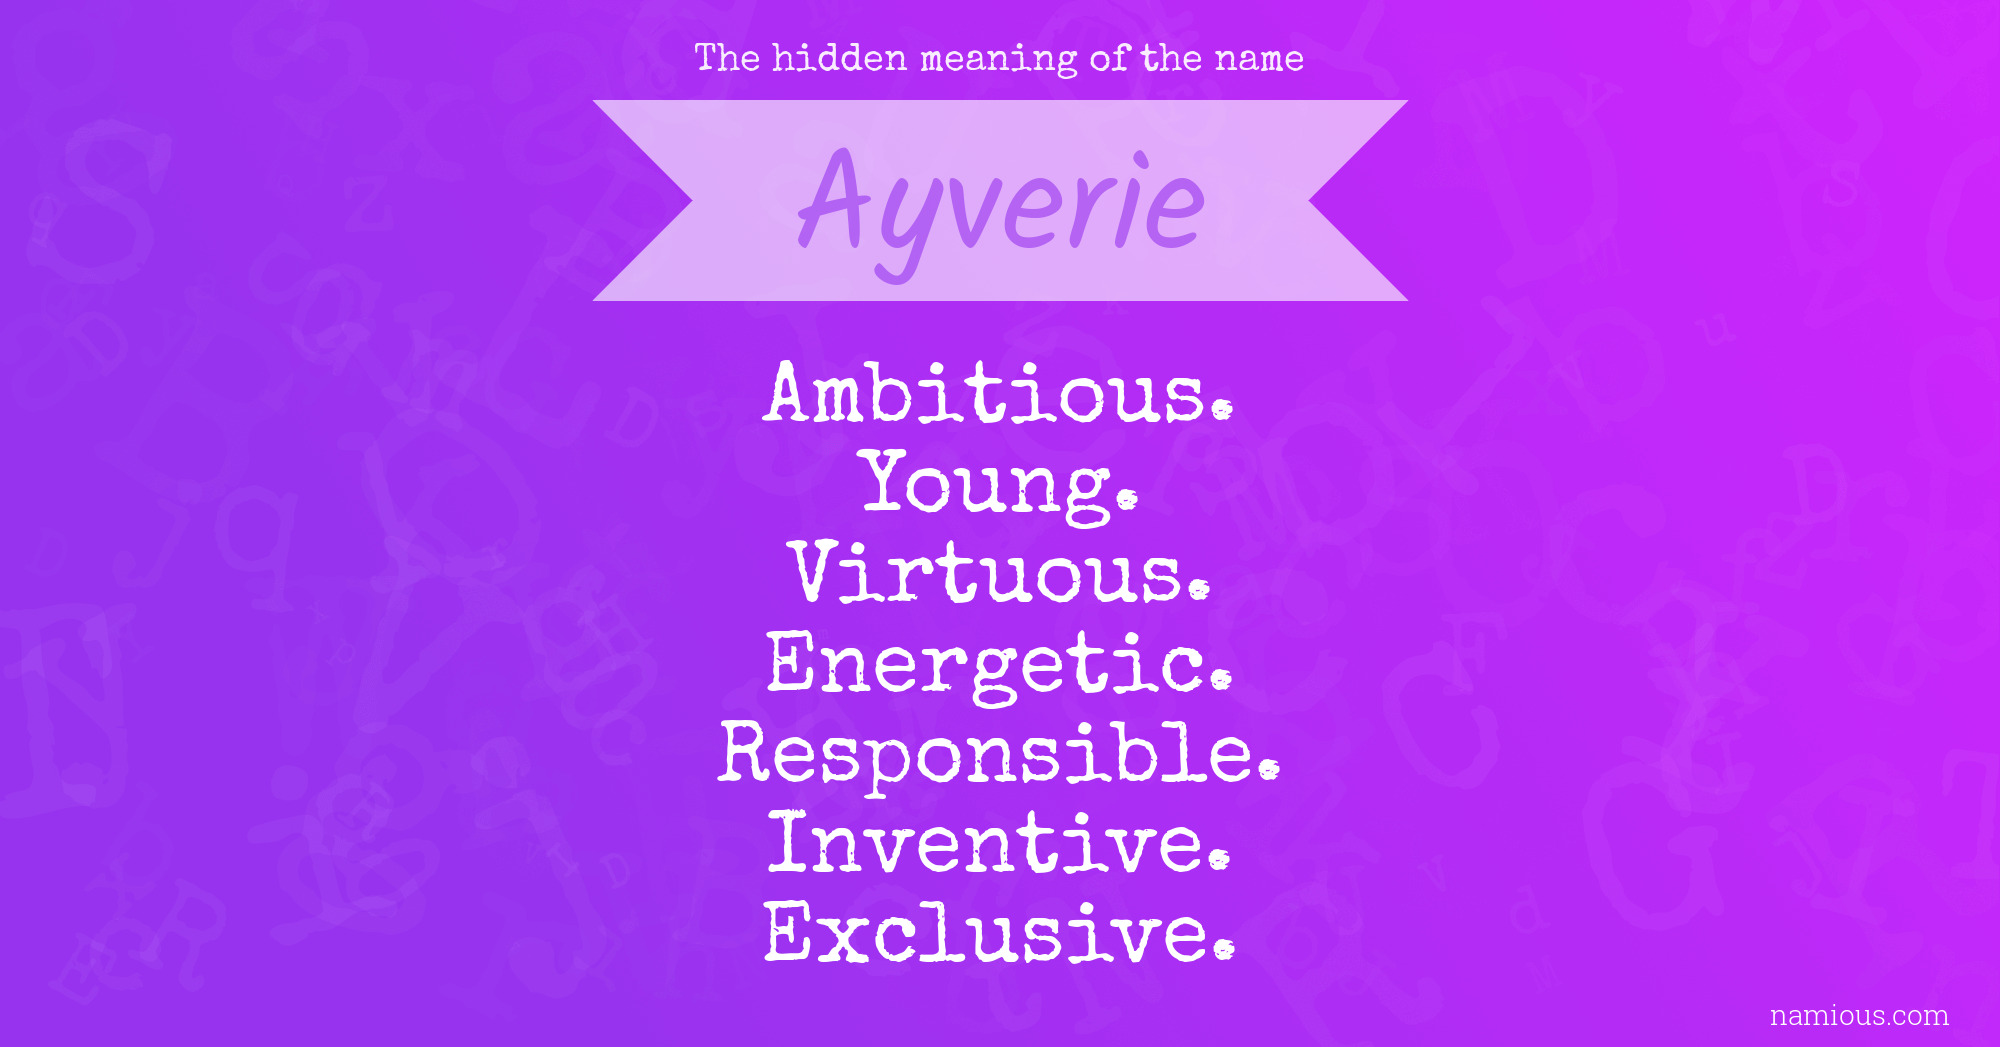 The hidden meaning of the name Ayverie